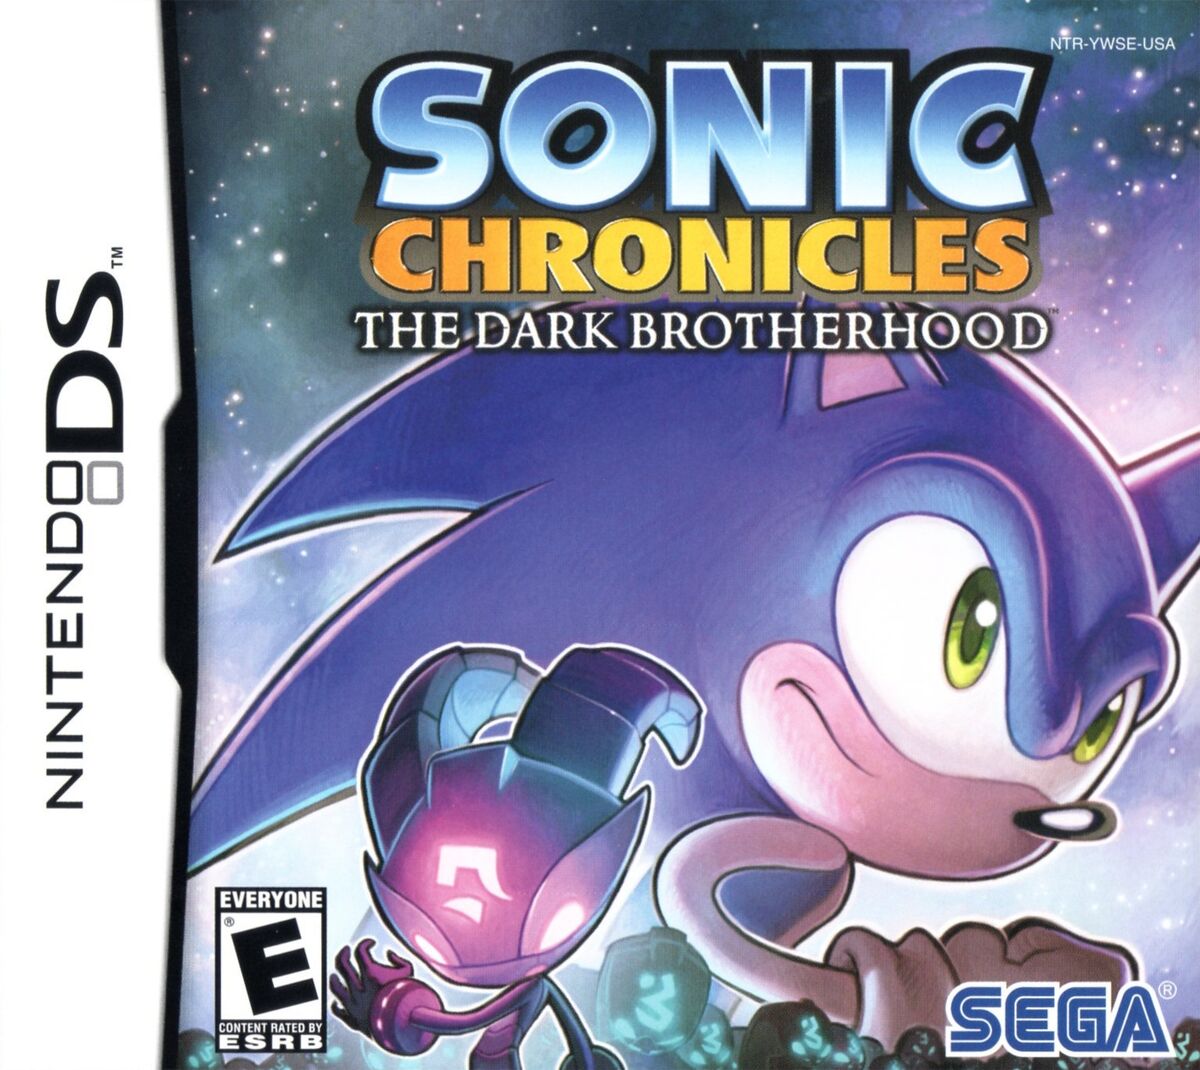 Sonic Classic Collection (DS) - The Cover Project